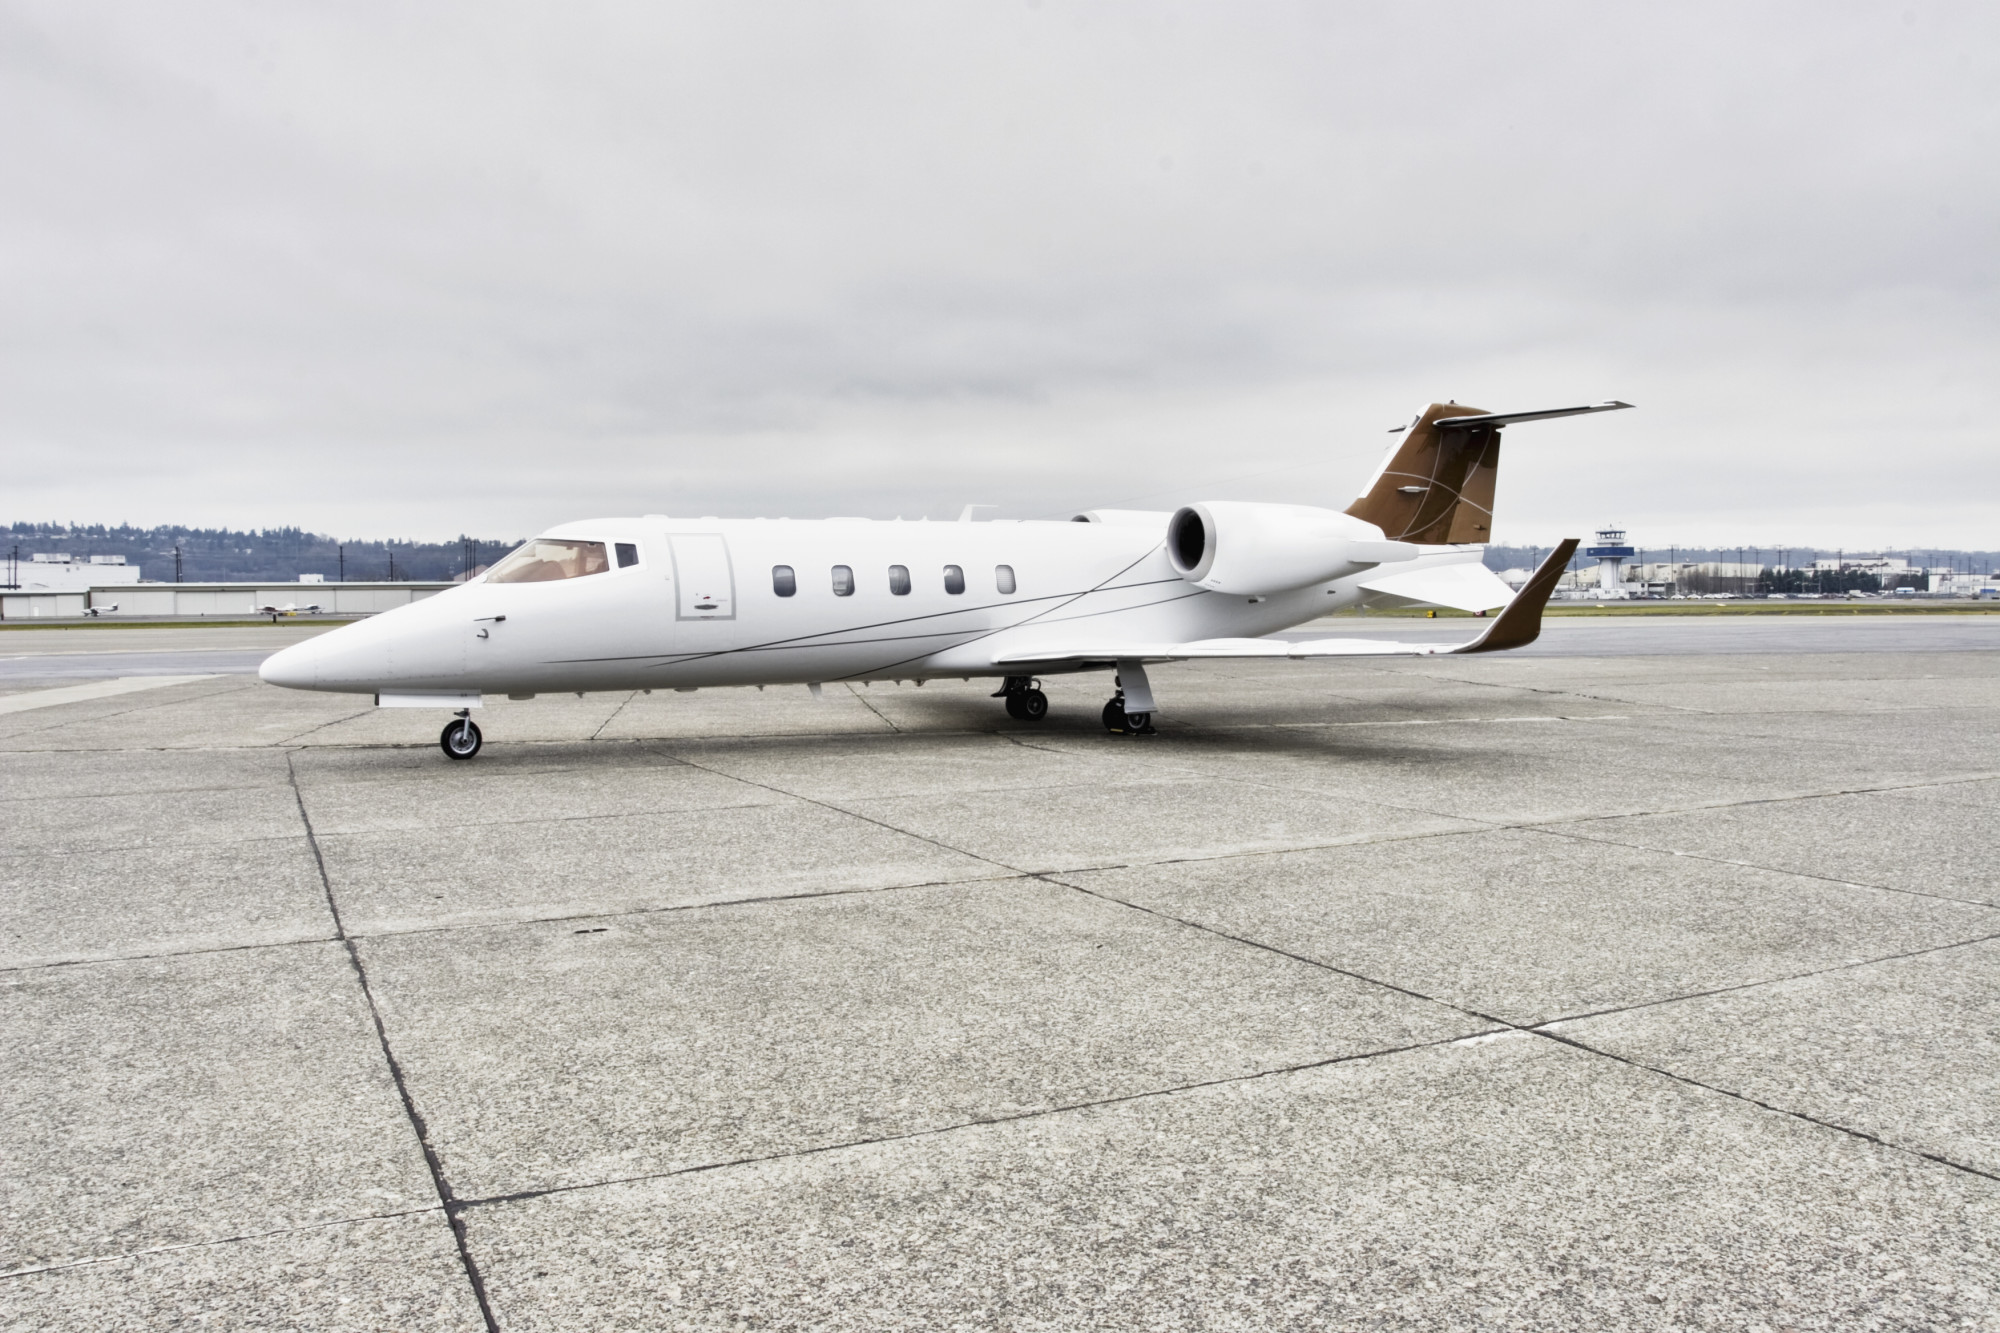 Learjet corporate aircraft profile on tarmac